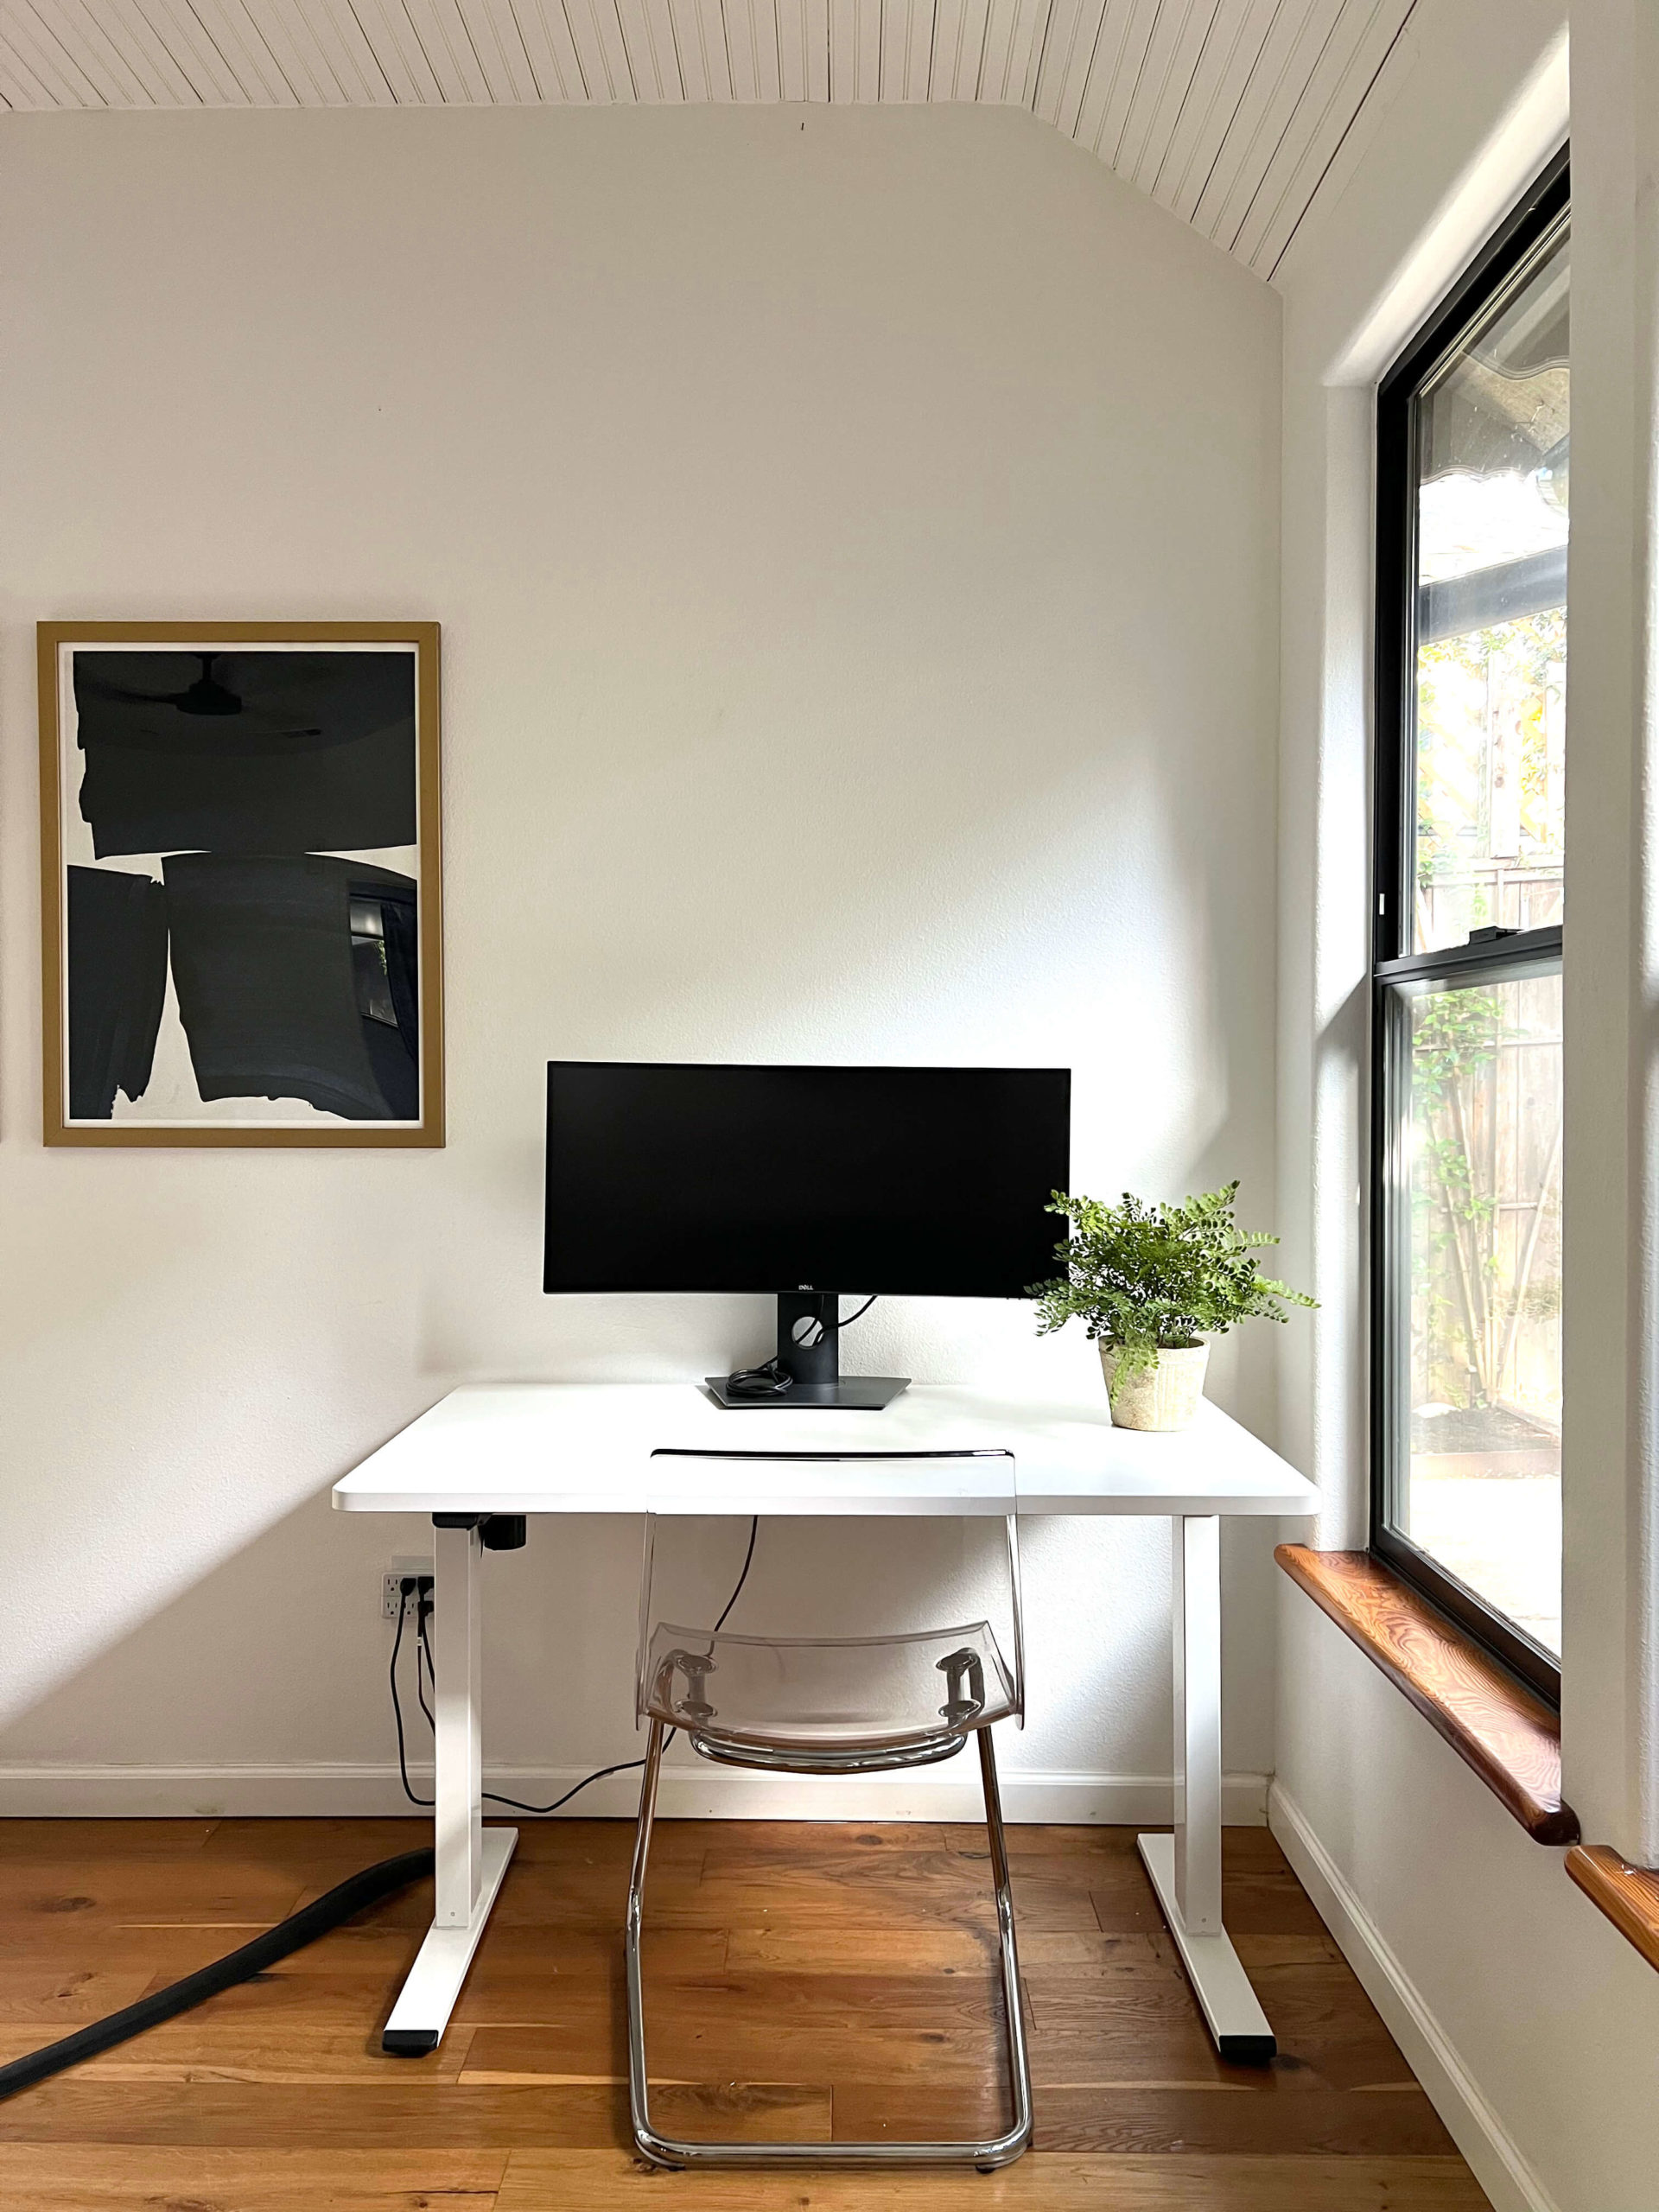 Desk in living room of Bouldin Creek Airbnb in South Austin, Texas, computer monitor, white desk, clear chair, black and white abstract painting on wall